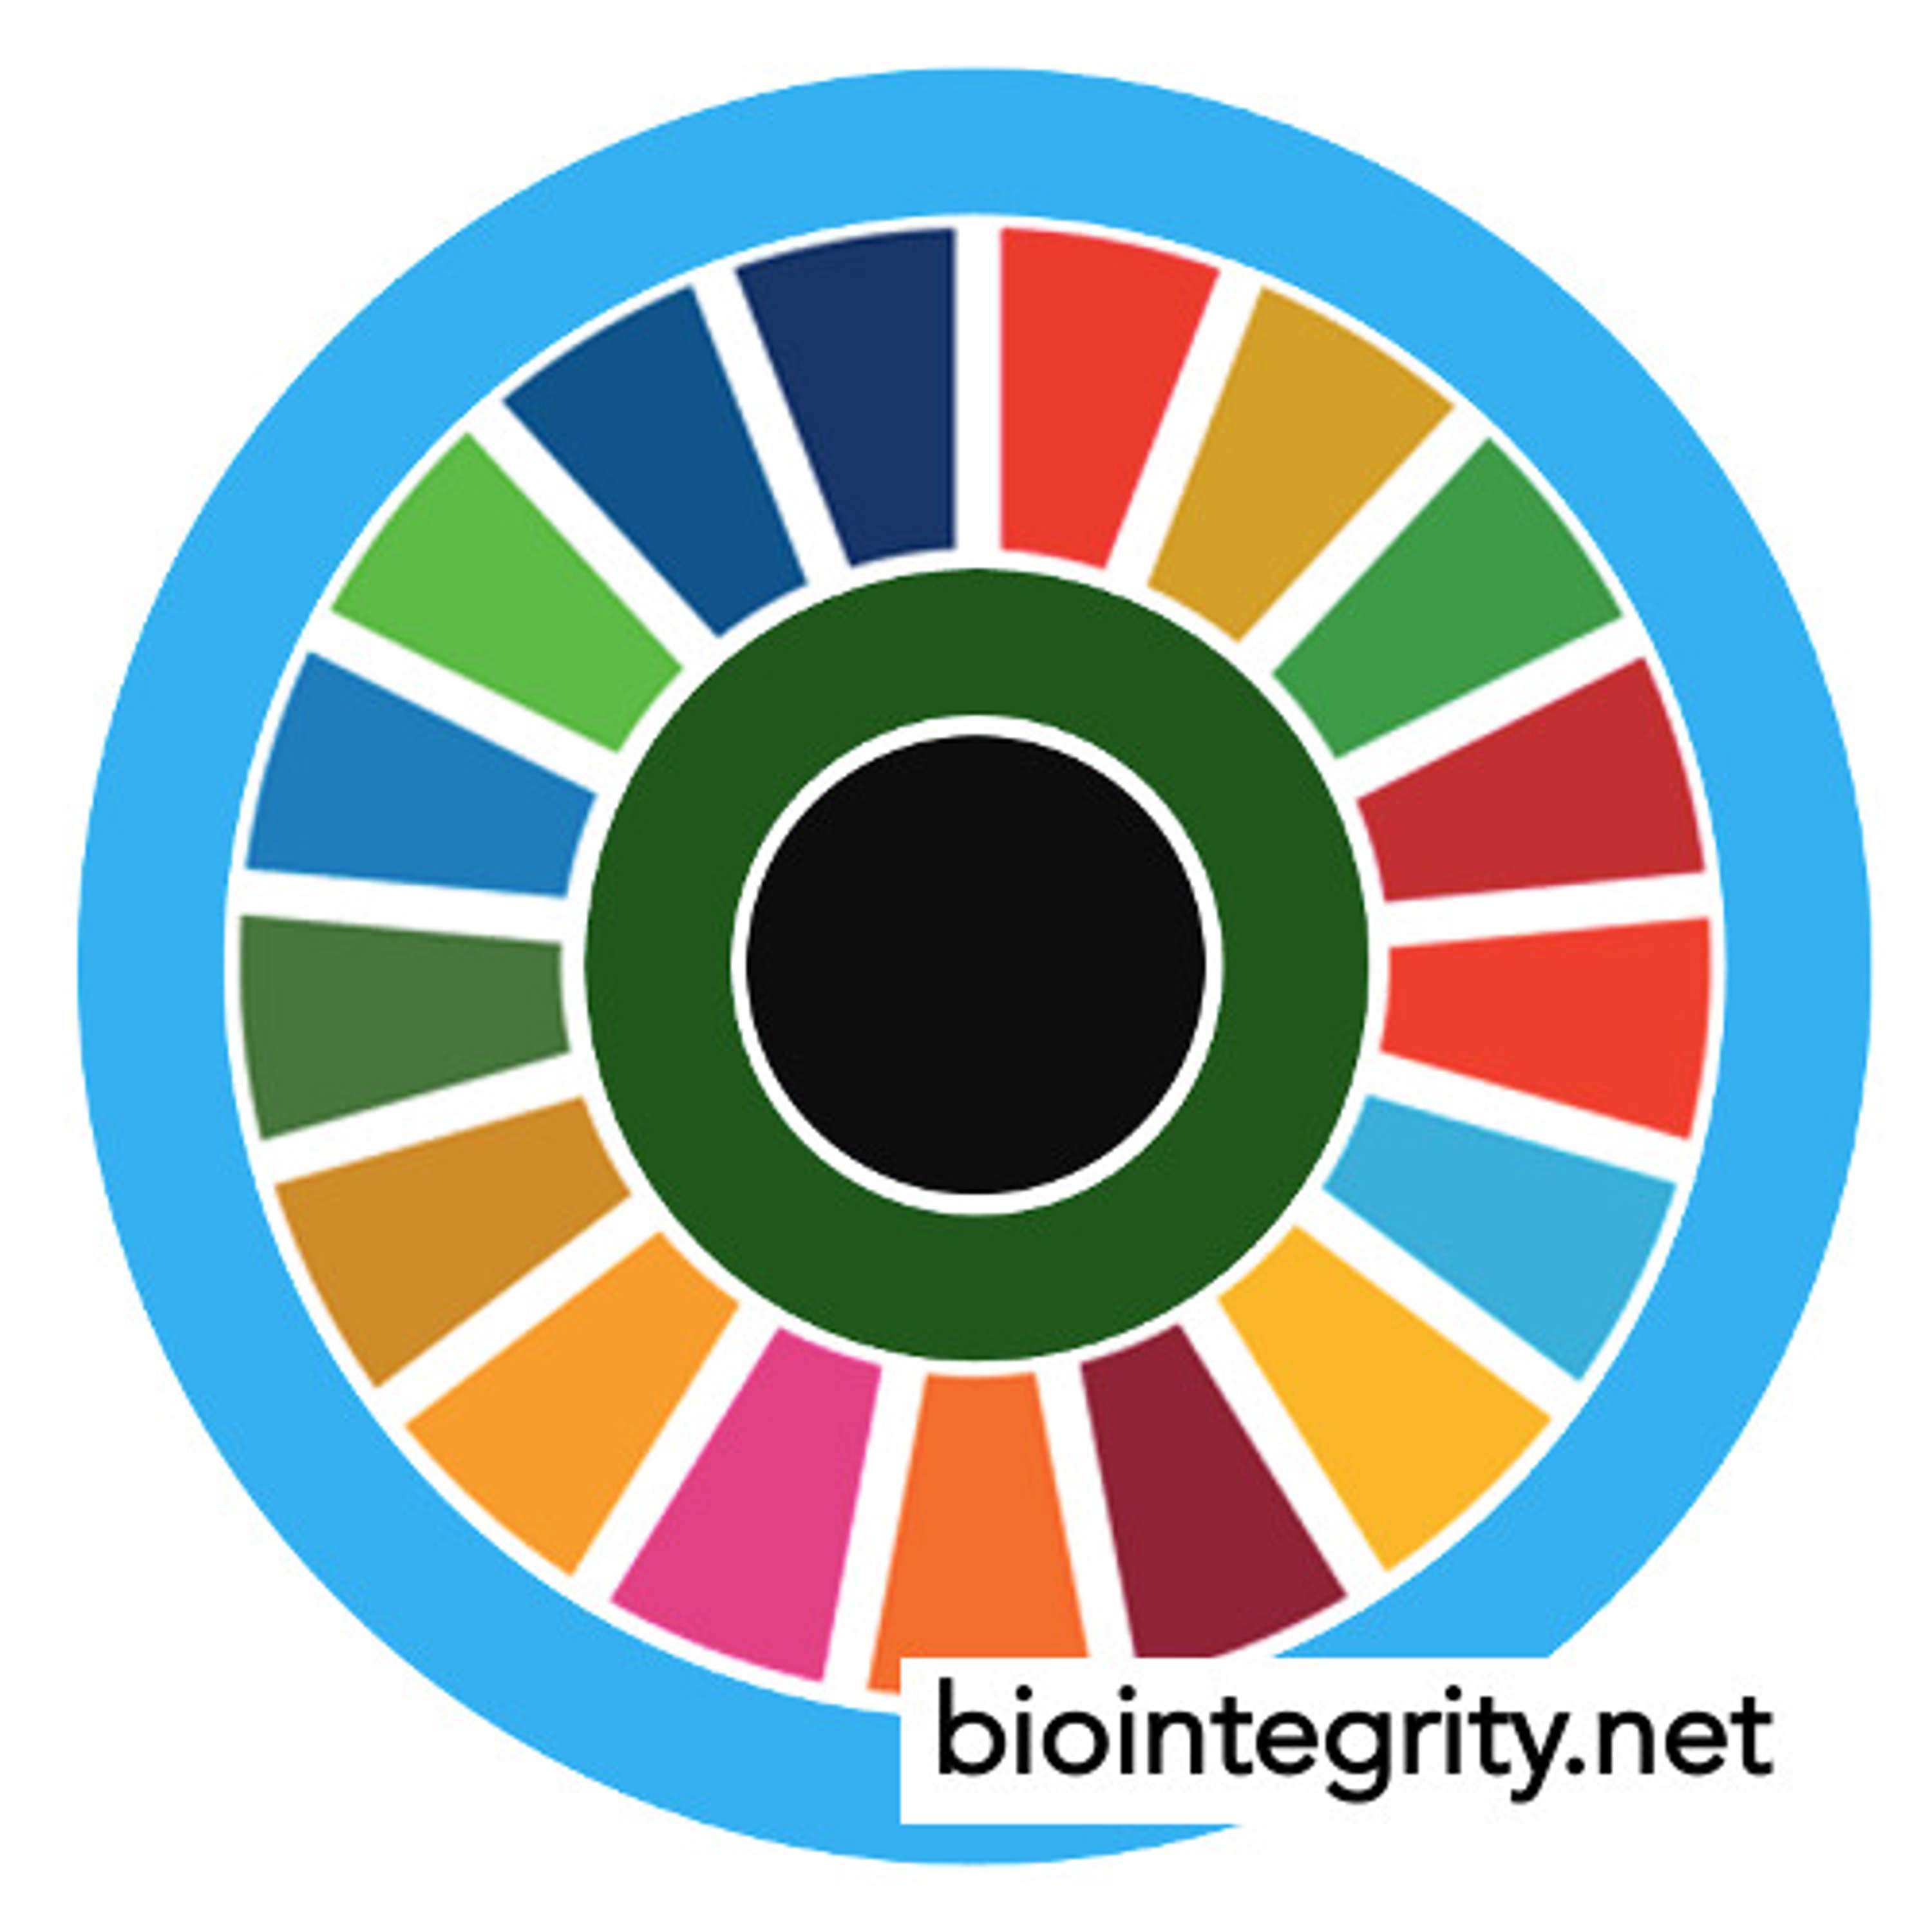 Response to "UN says World has 10 months," and an update on BioIntegrity 2.0